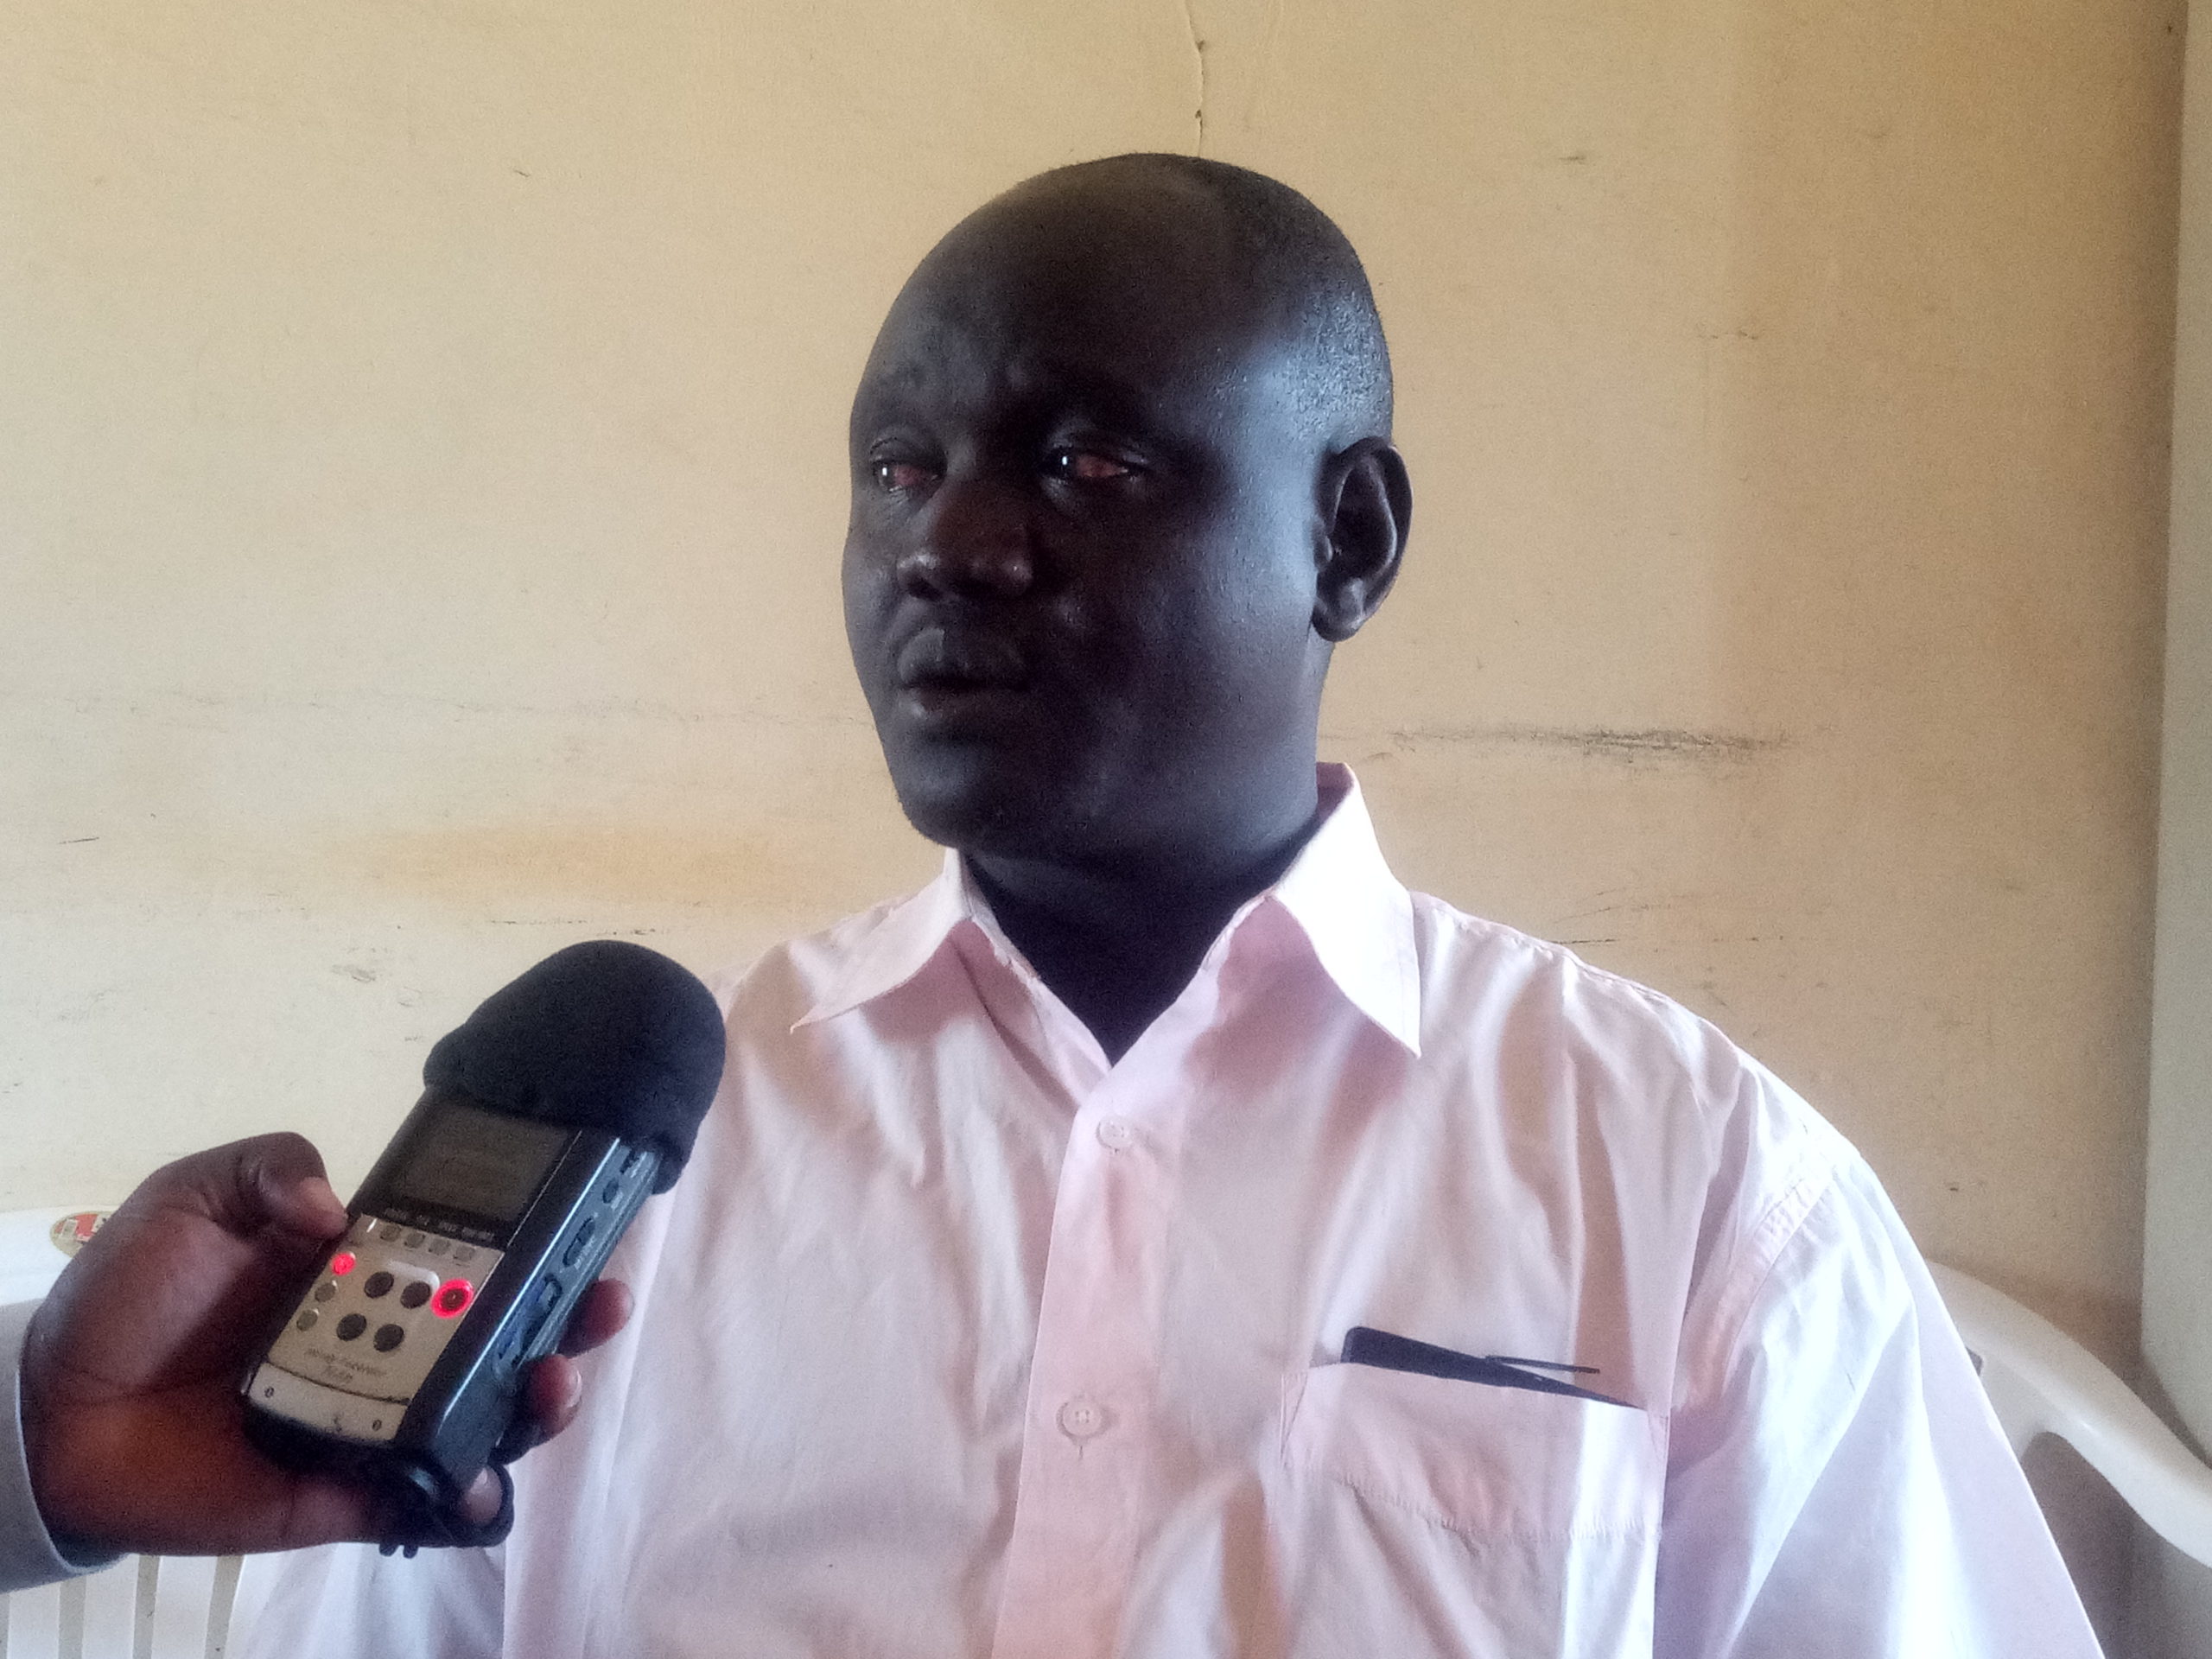 Torit hospital runs out of health care workers